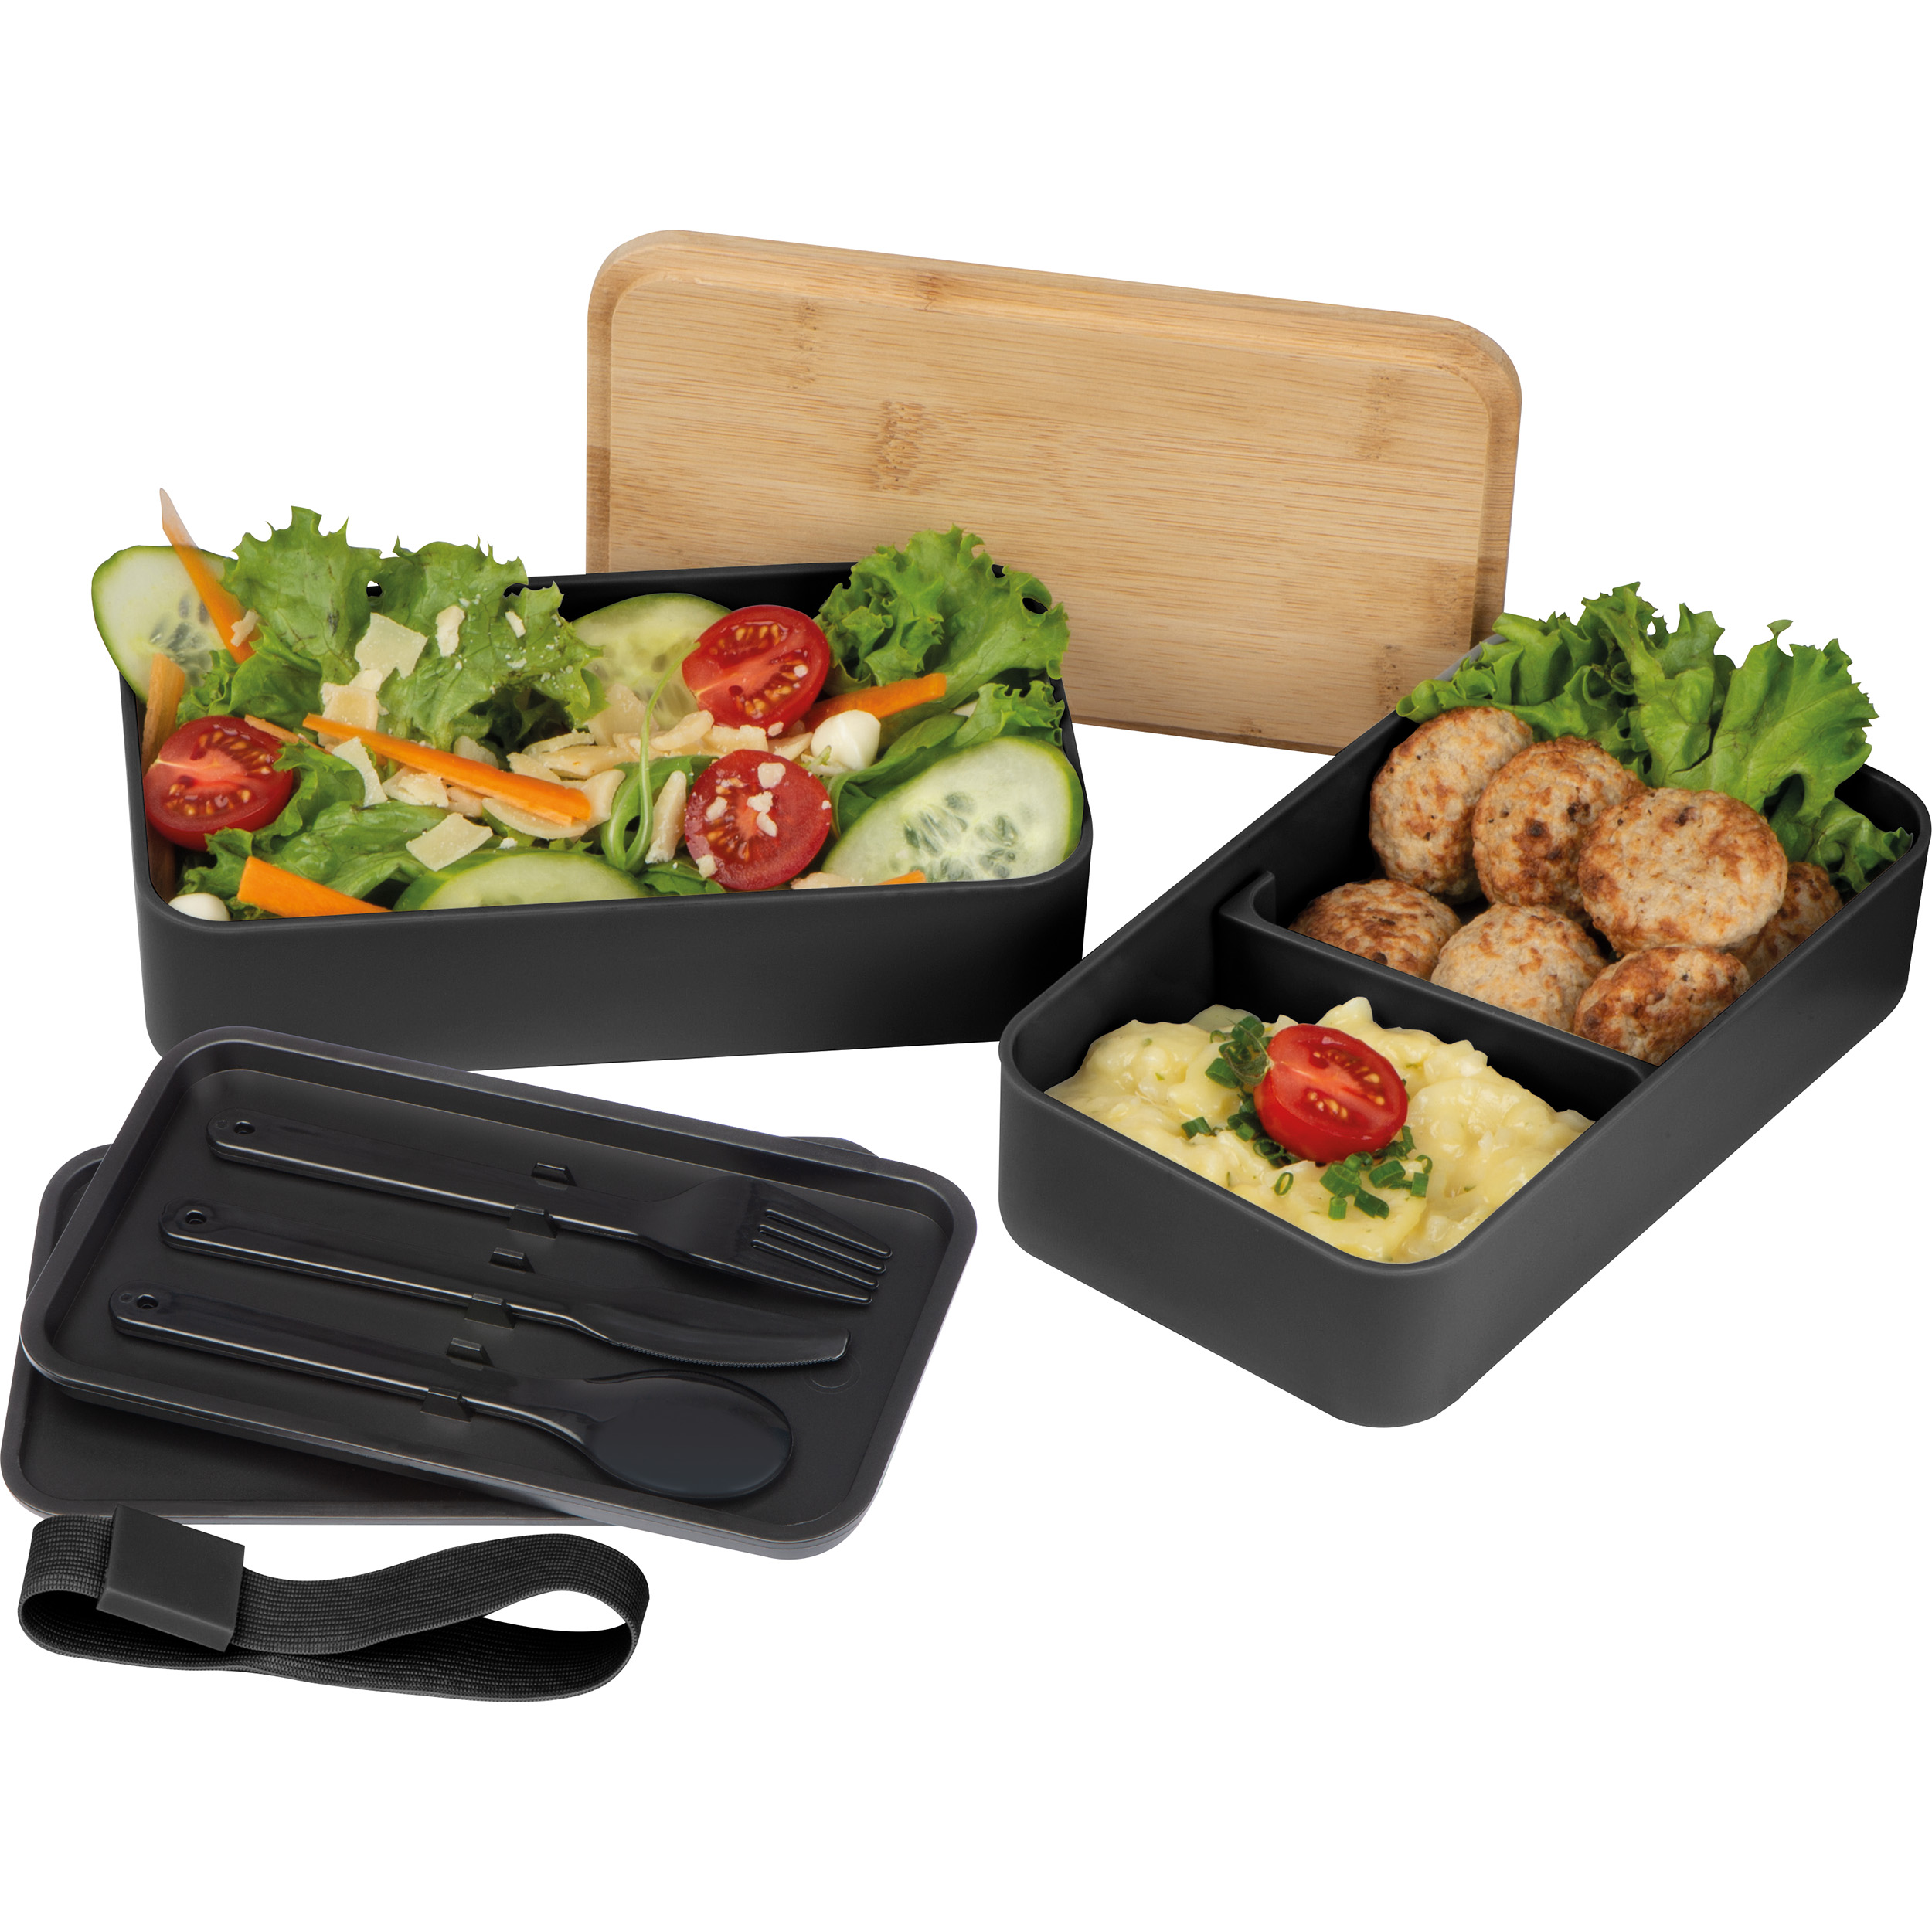 Lunchbox with two compartments